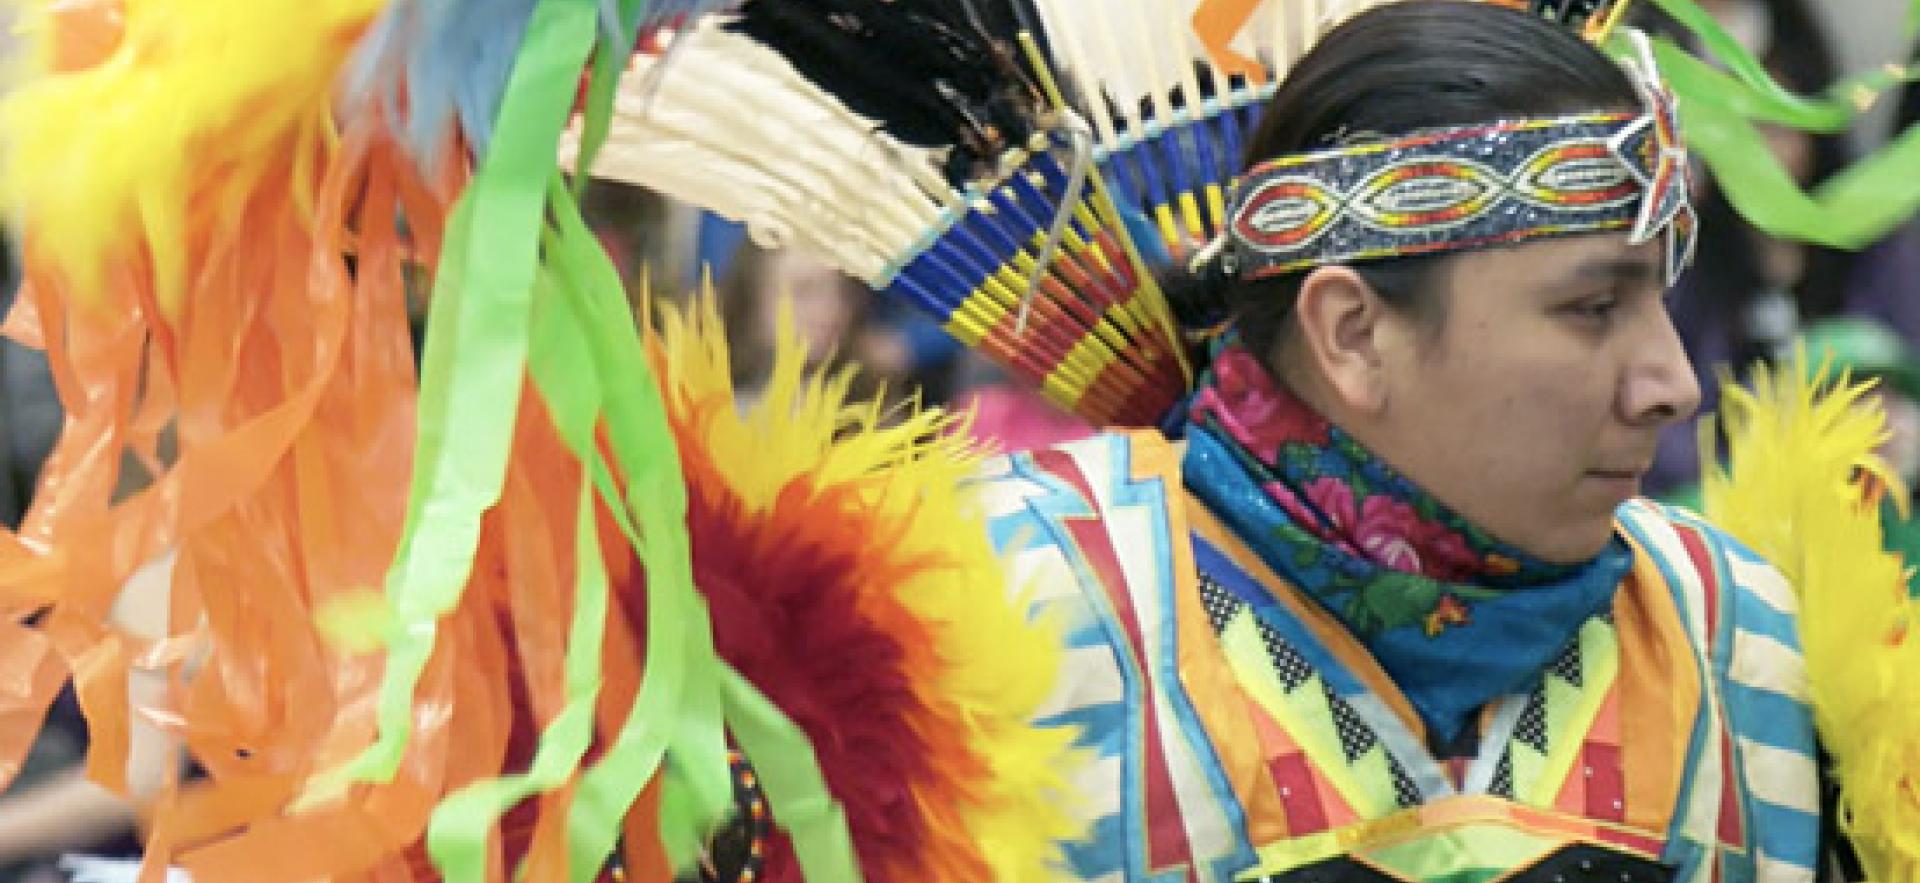 Wearing a colourful costume, an indigenous male dances at a pow wow.